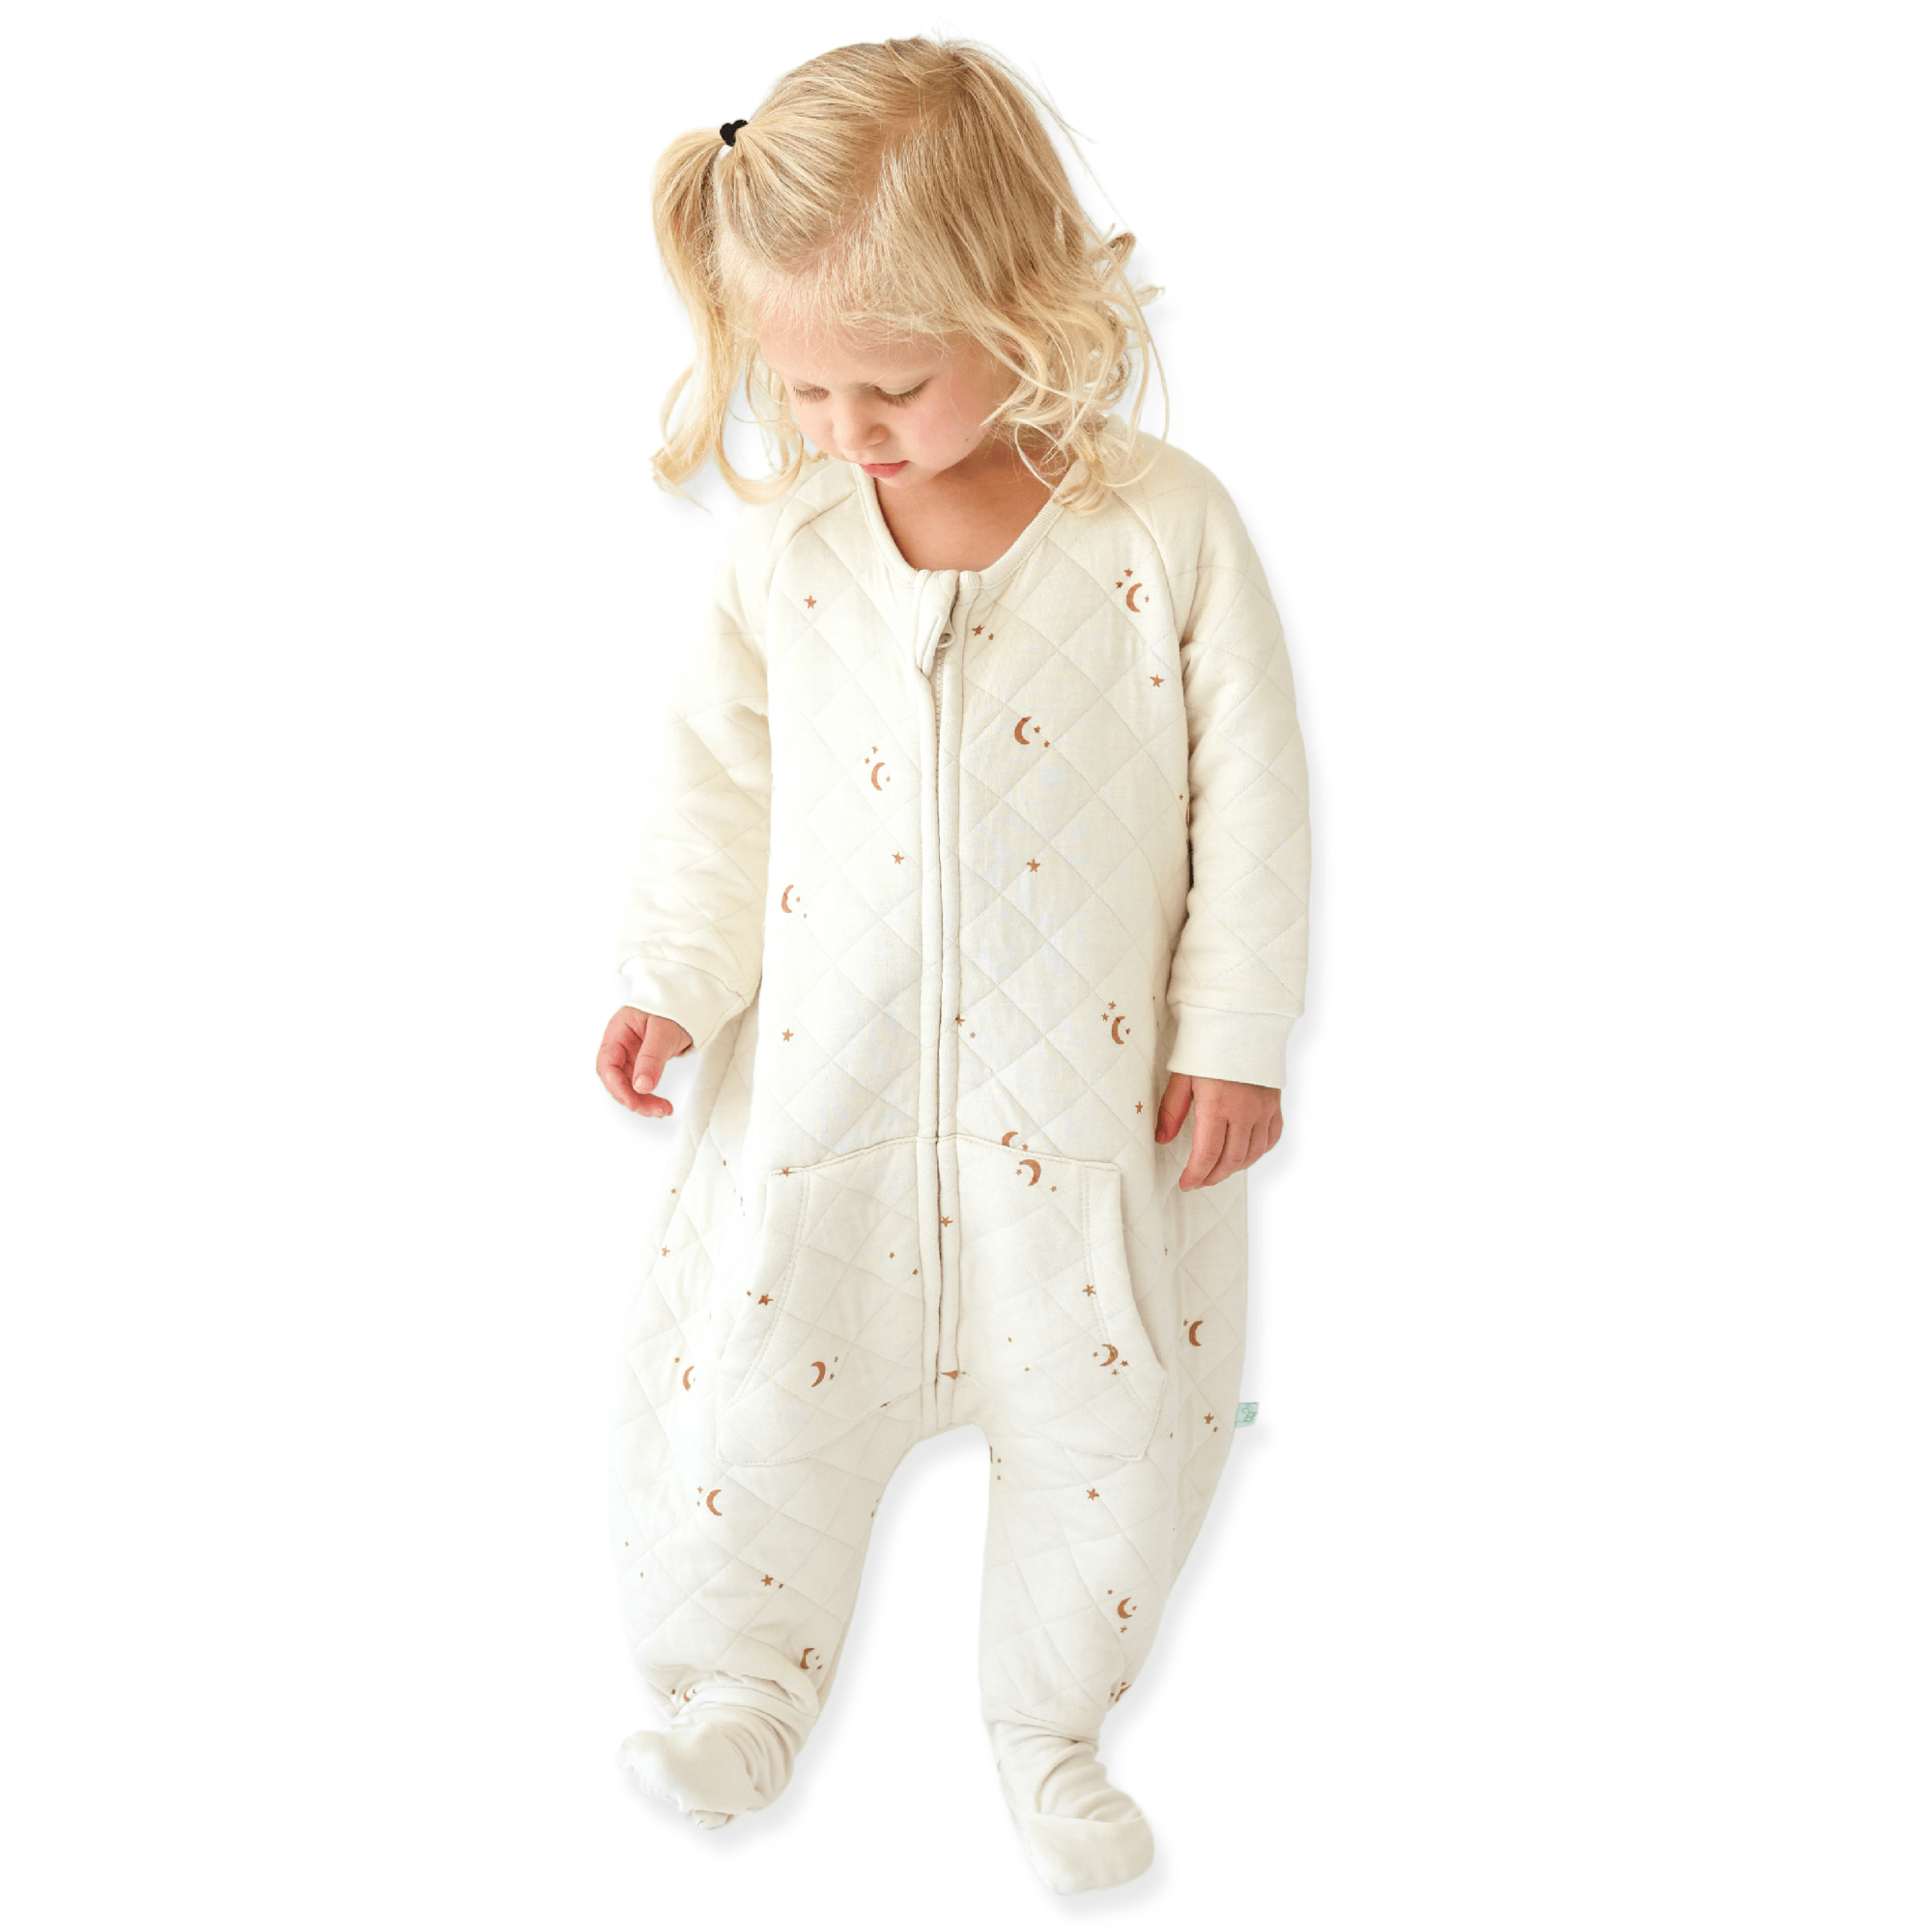 Baby wearing Sleep Sack Tealbee Dreamsie Moons and Stars 1.2 TOG available from sizes 12m - 4T